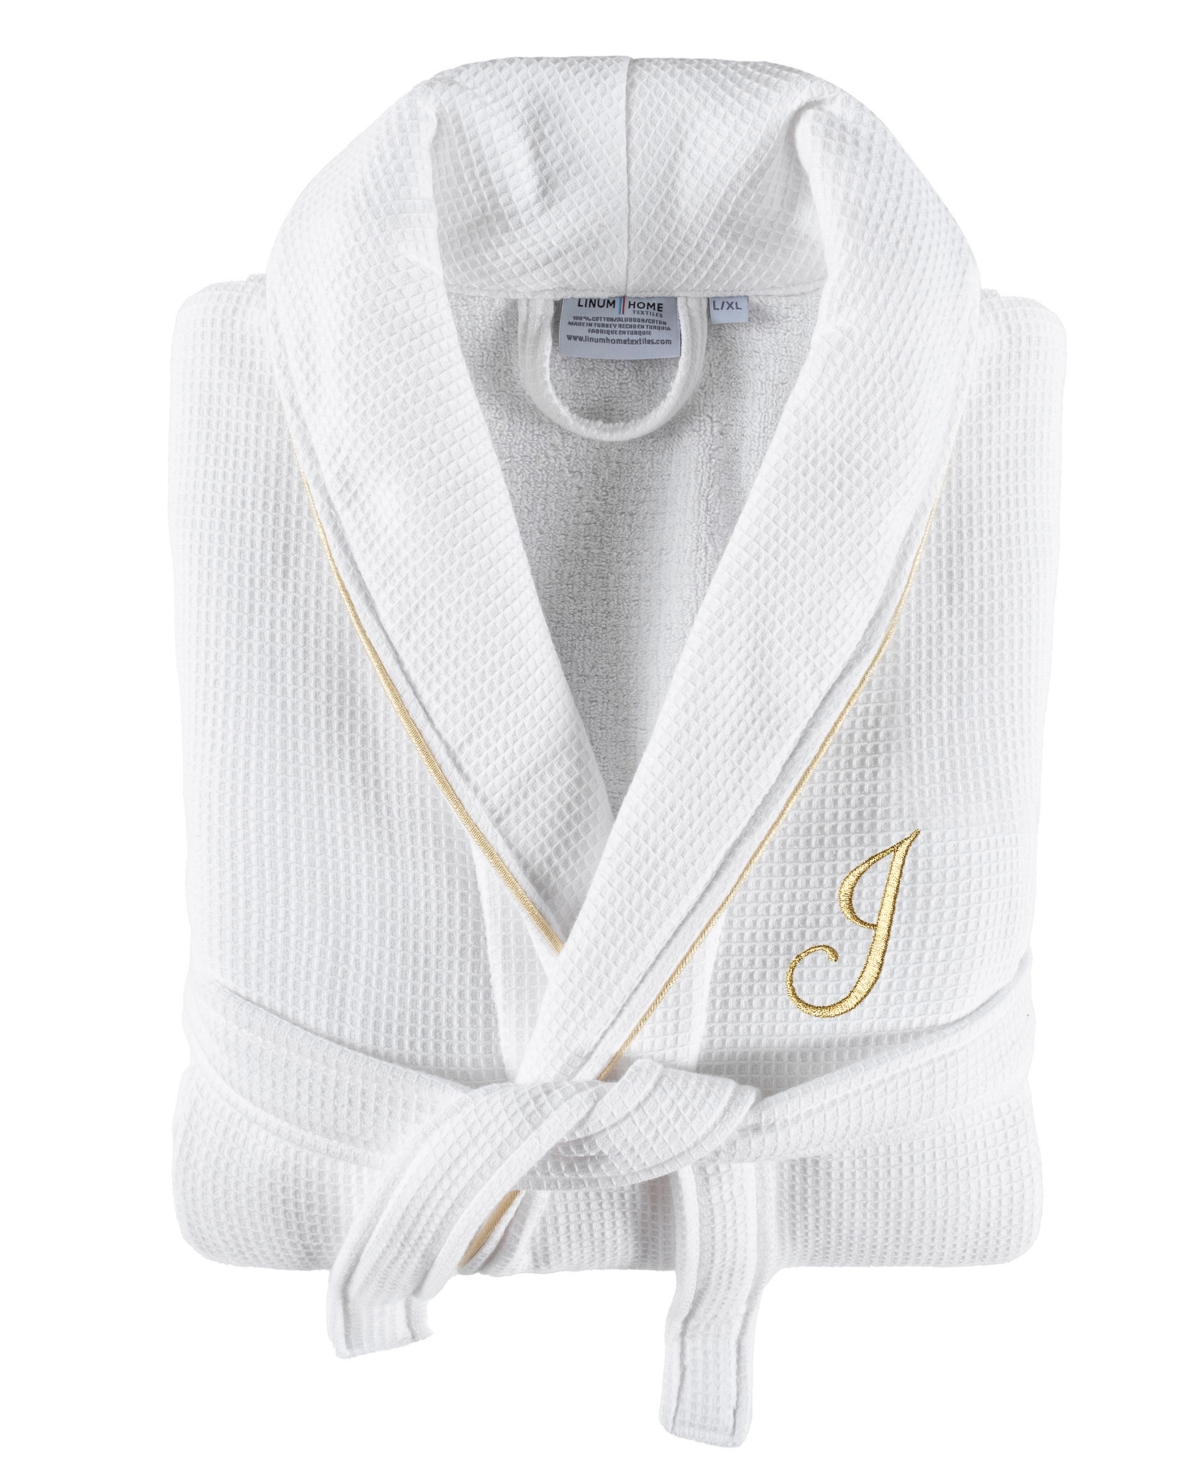 Linum Home Textiles 100% Turkish Cotton Unisex Personalized Waffle Weave Terry Bathrobe With Satin Piped Trim In White J